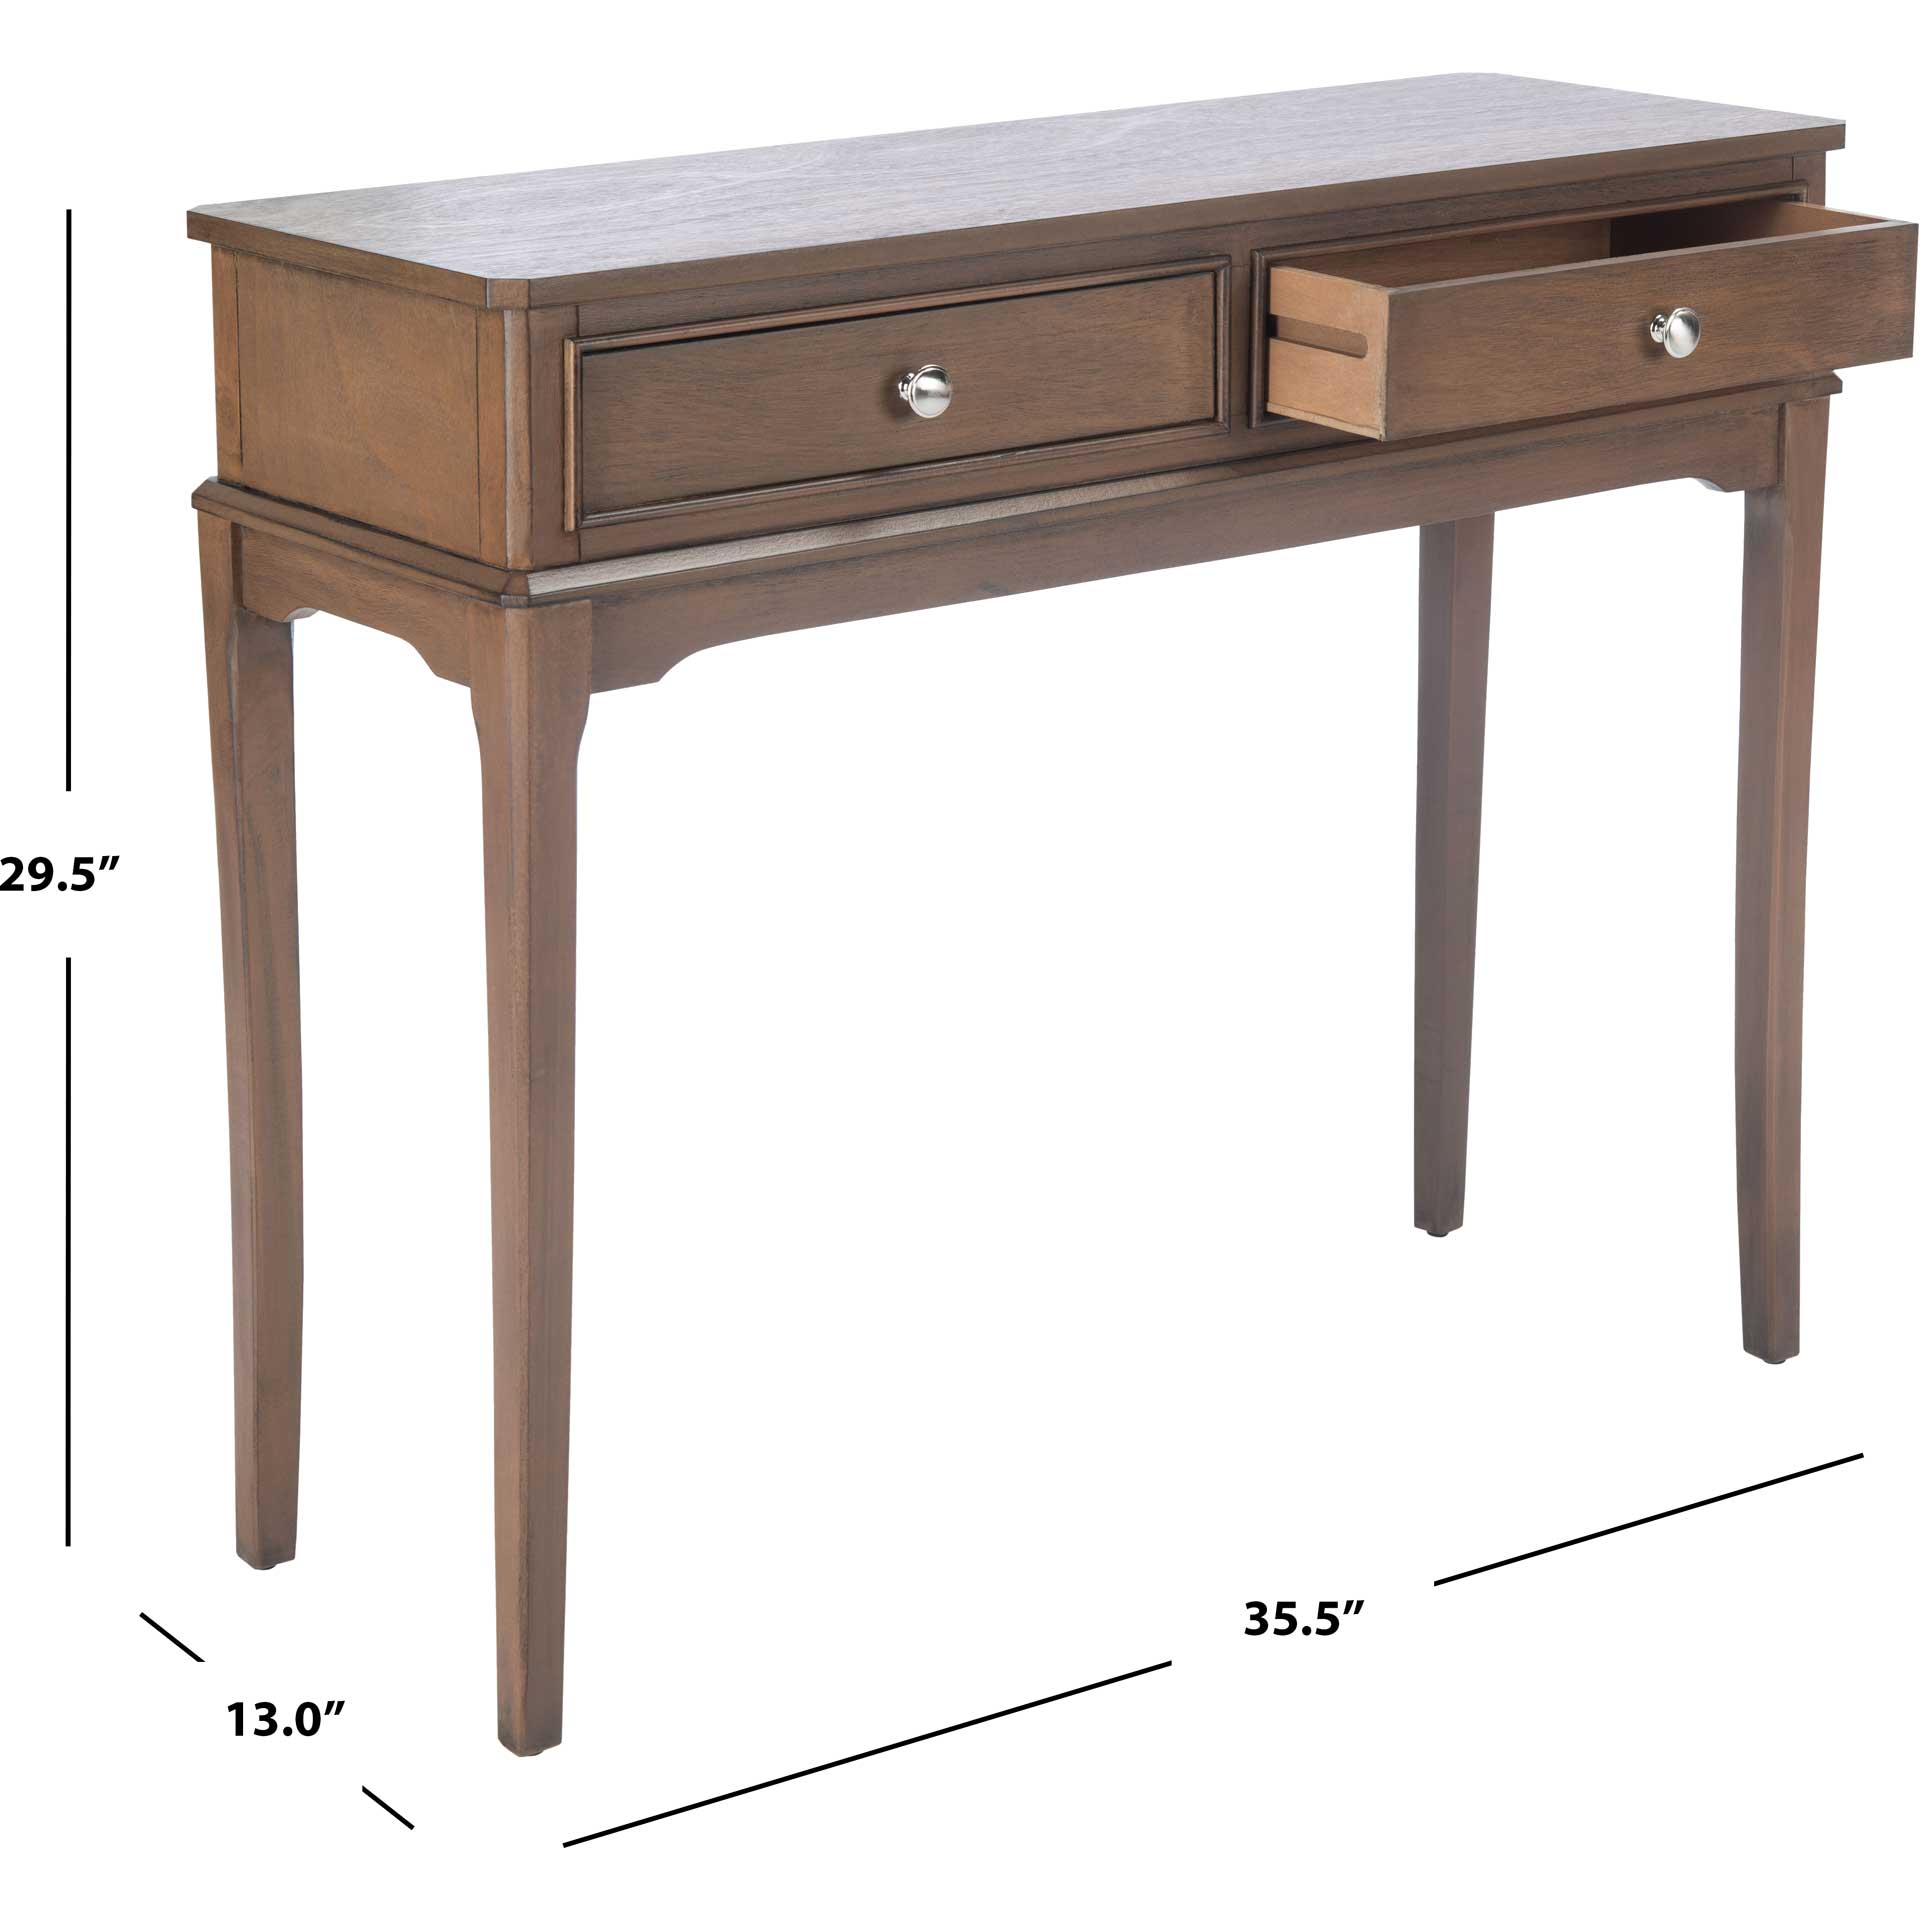 Ophelia 2 Drawer Console Table Brown